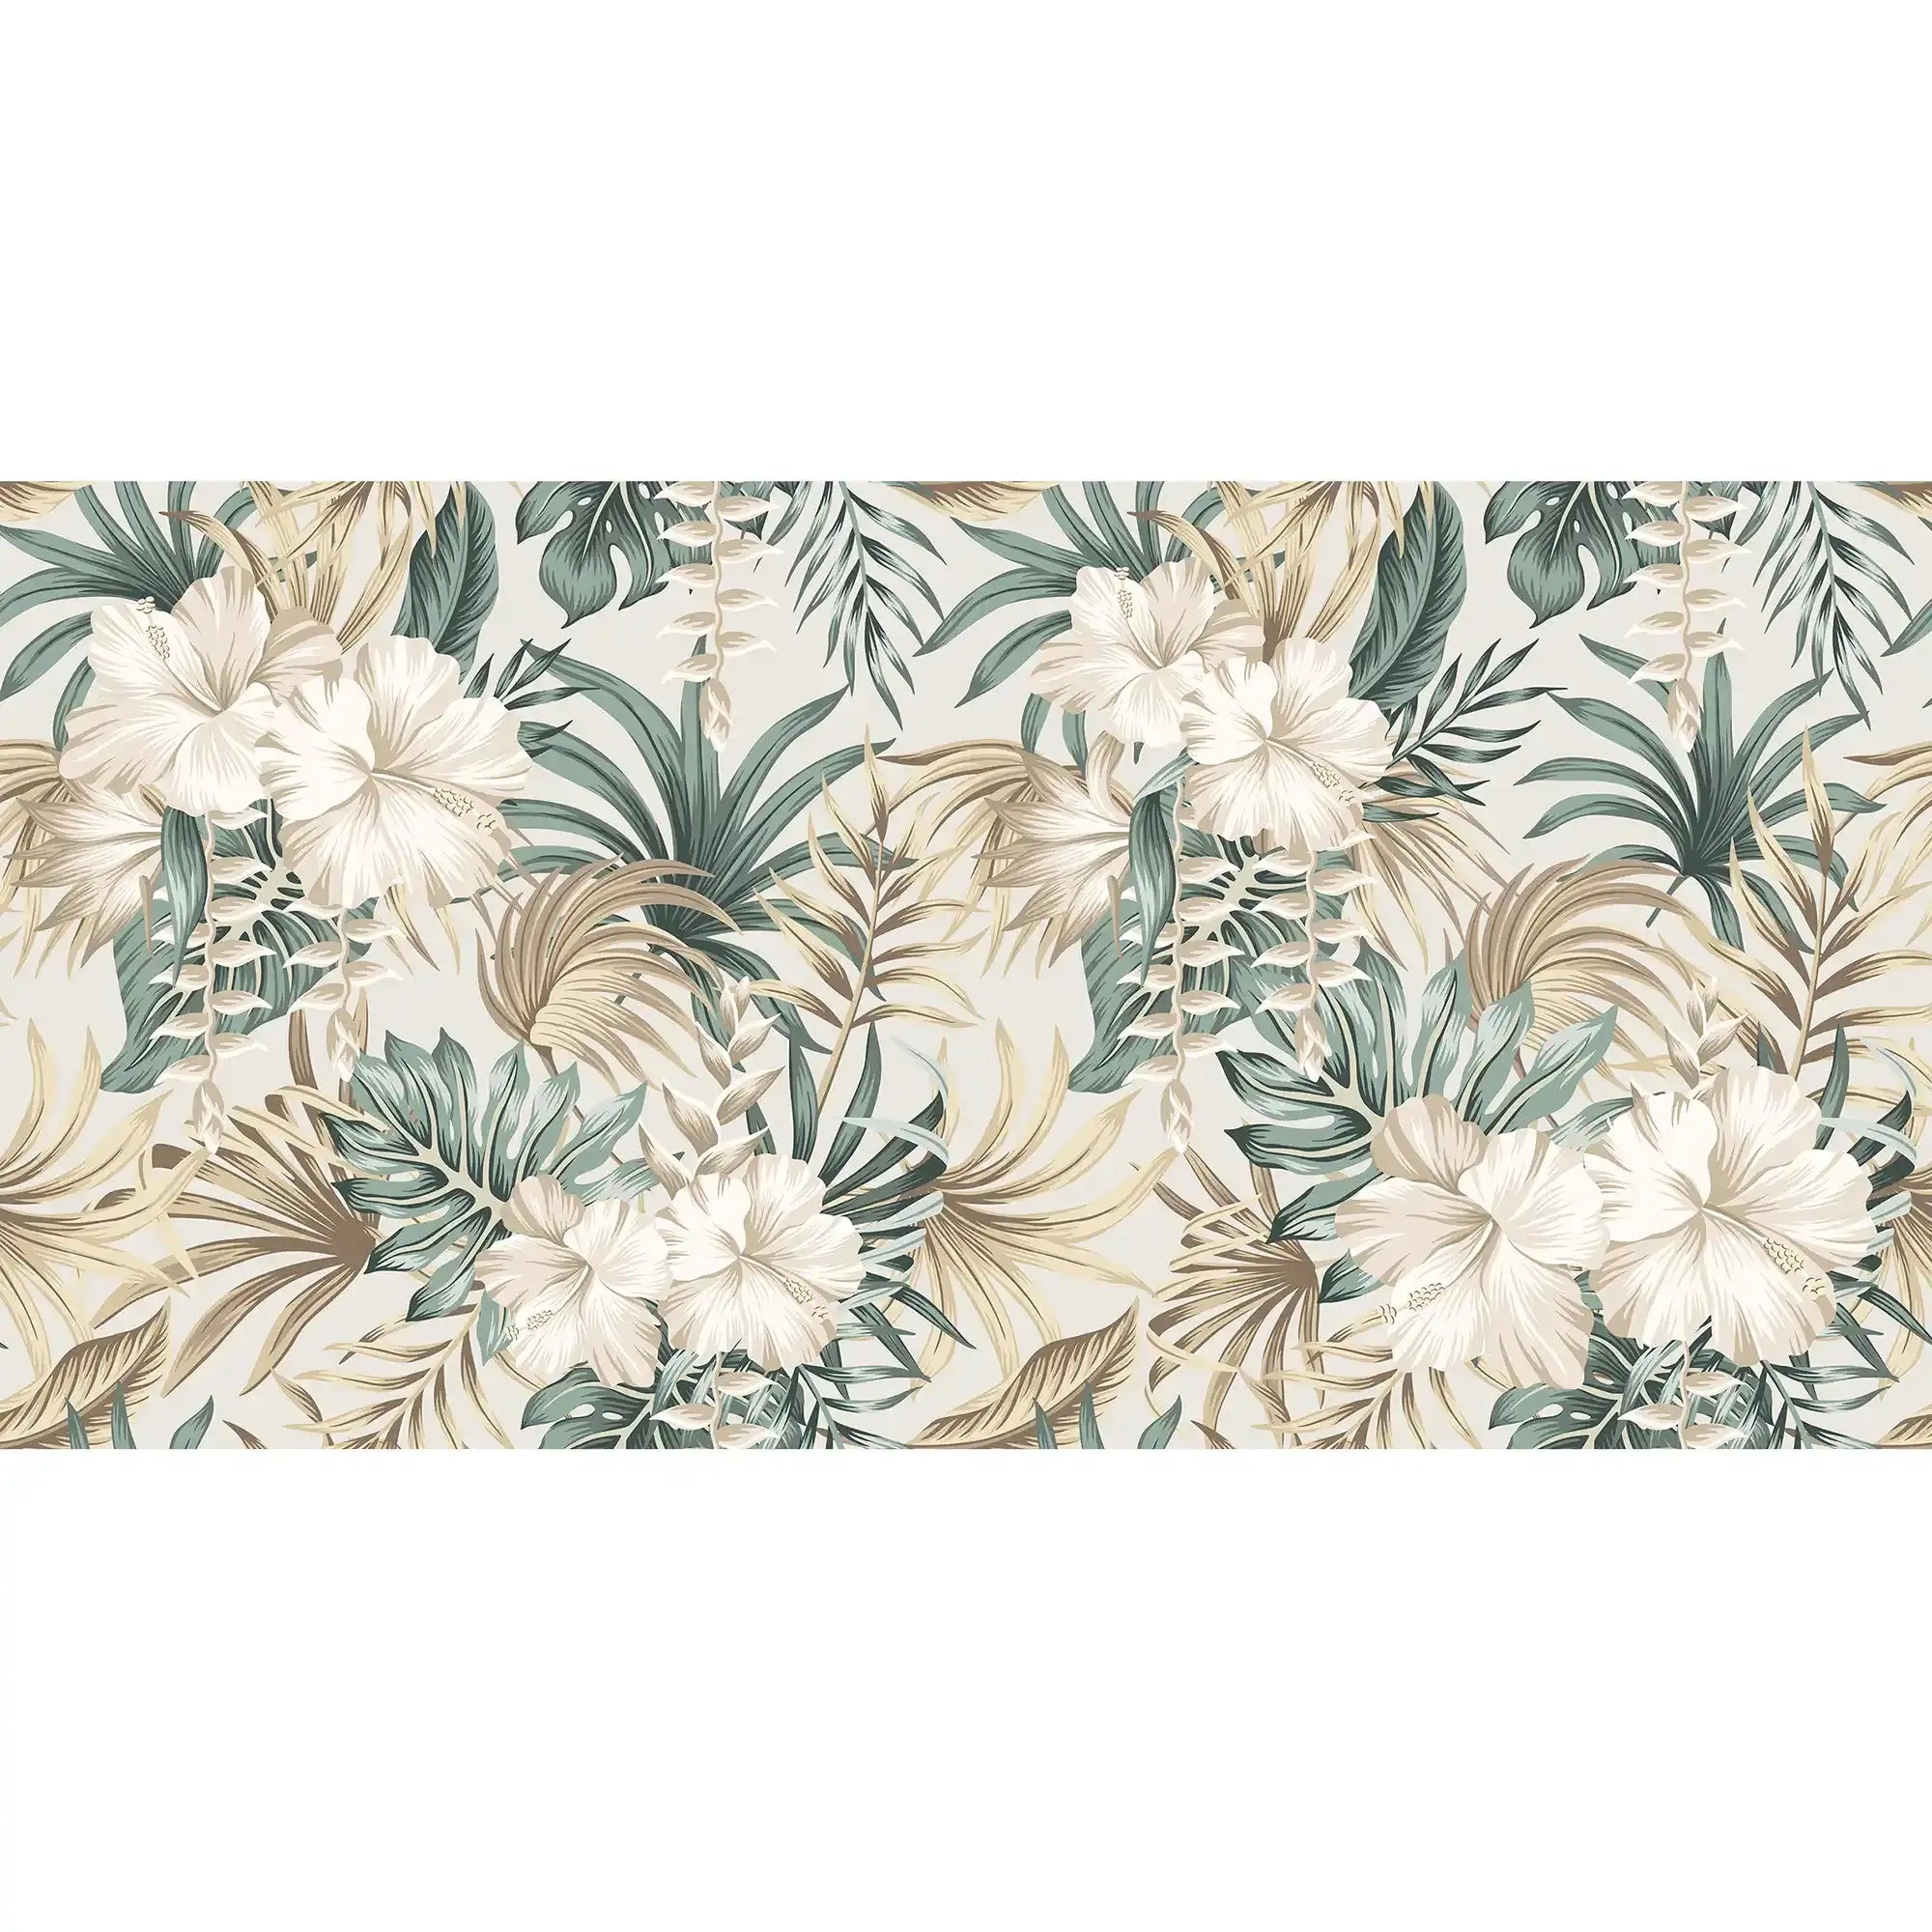 3099-A / Contemporary Floral Peel and Stick Wallpaper, Trendy Tropical Pattern, Adhesive Wall Paper, Easy Installation for Kitchen, Bedroom, Bathroom - Artevella